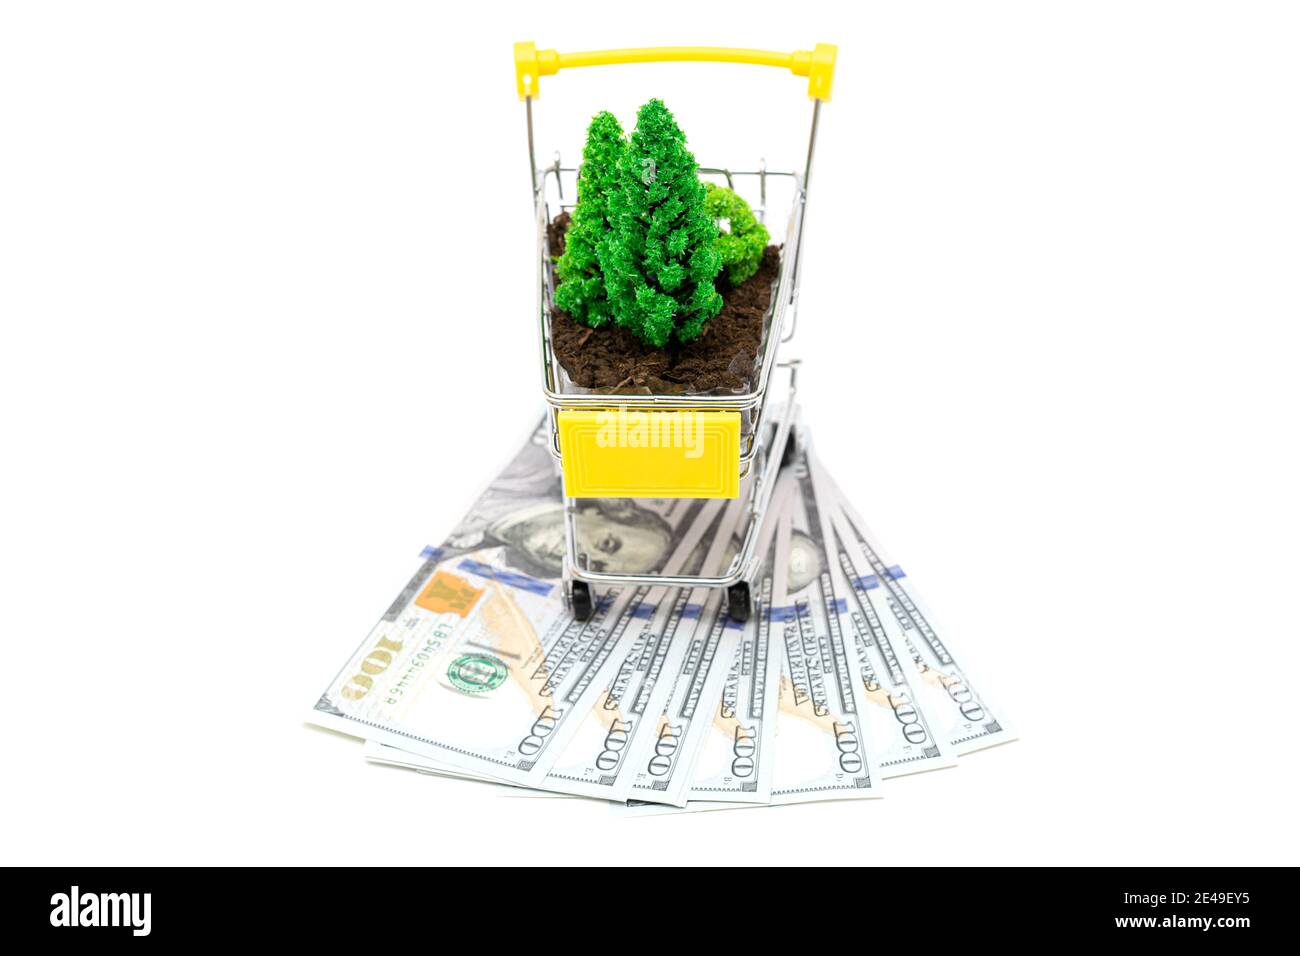 Toy shopping cart with soil and toy trees standing on dollar bills isolated on white. Illegal logging enrichment and deforestation concept. Stock Photo